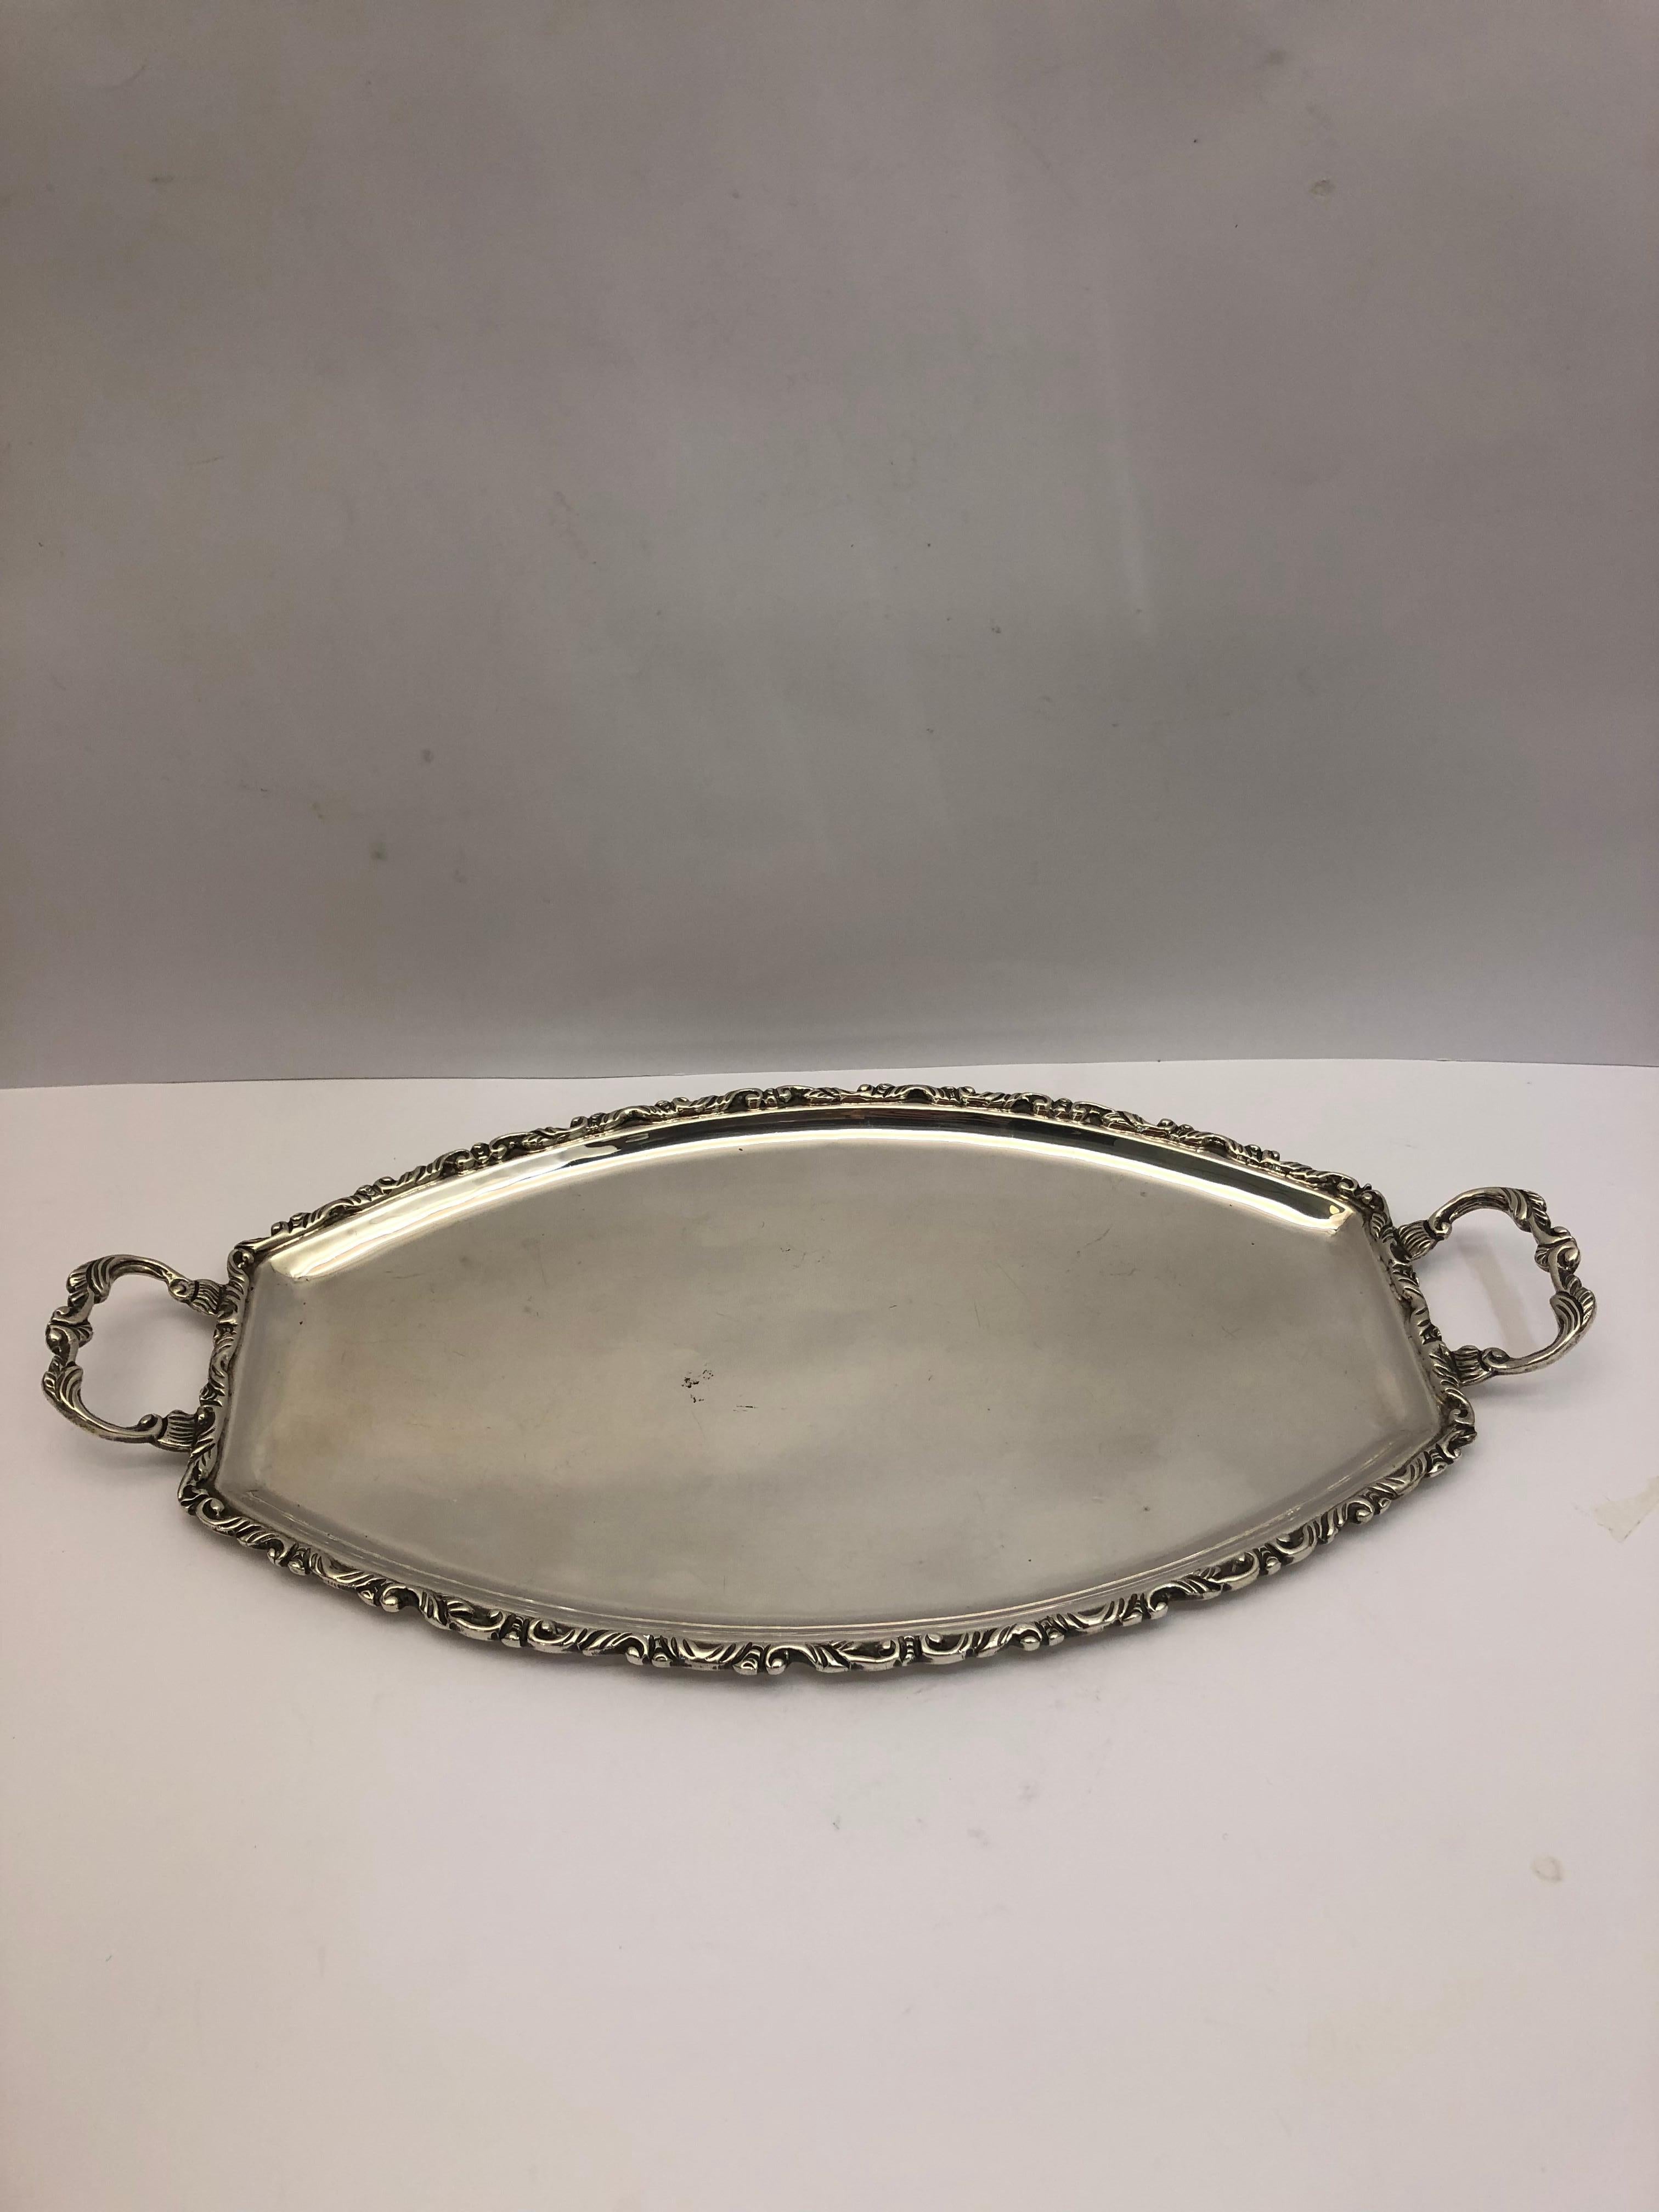 Silver Tray with Decorated Border and Handles, Hallmarked 925 Silver In Good Condition For Sale In London, London